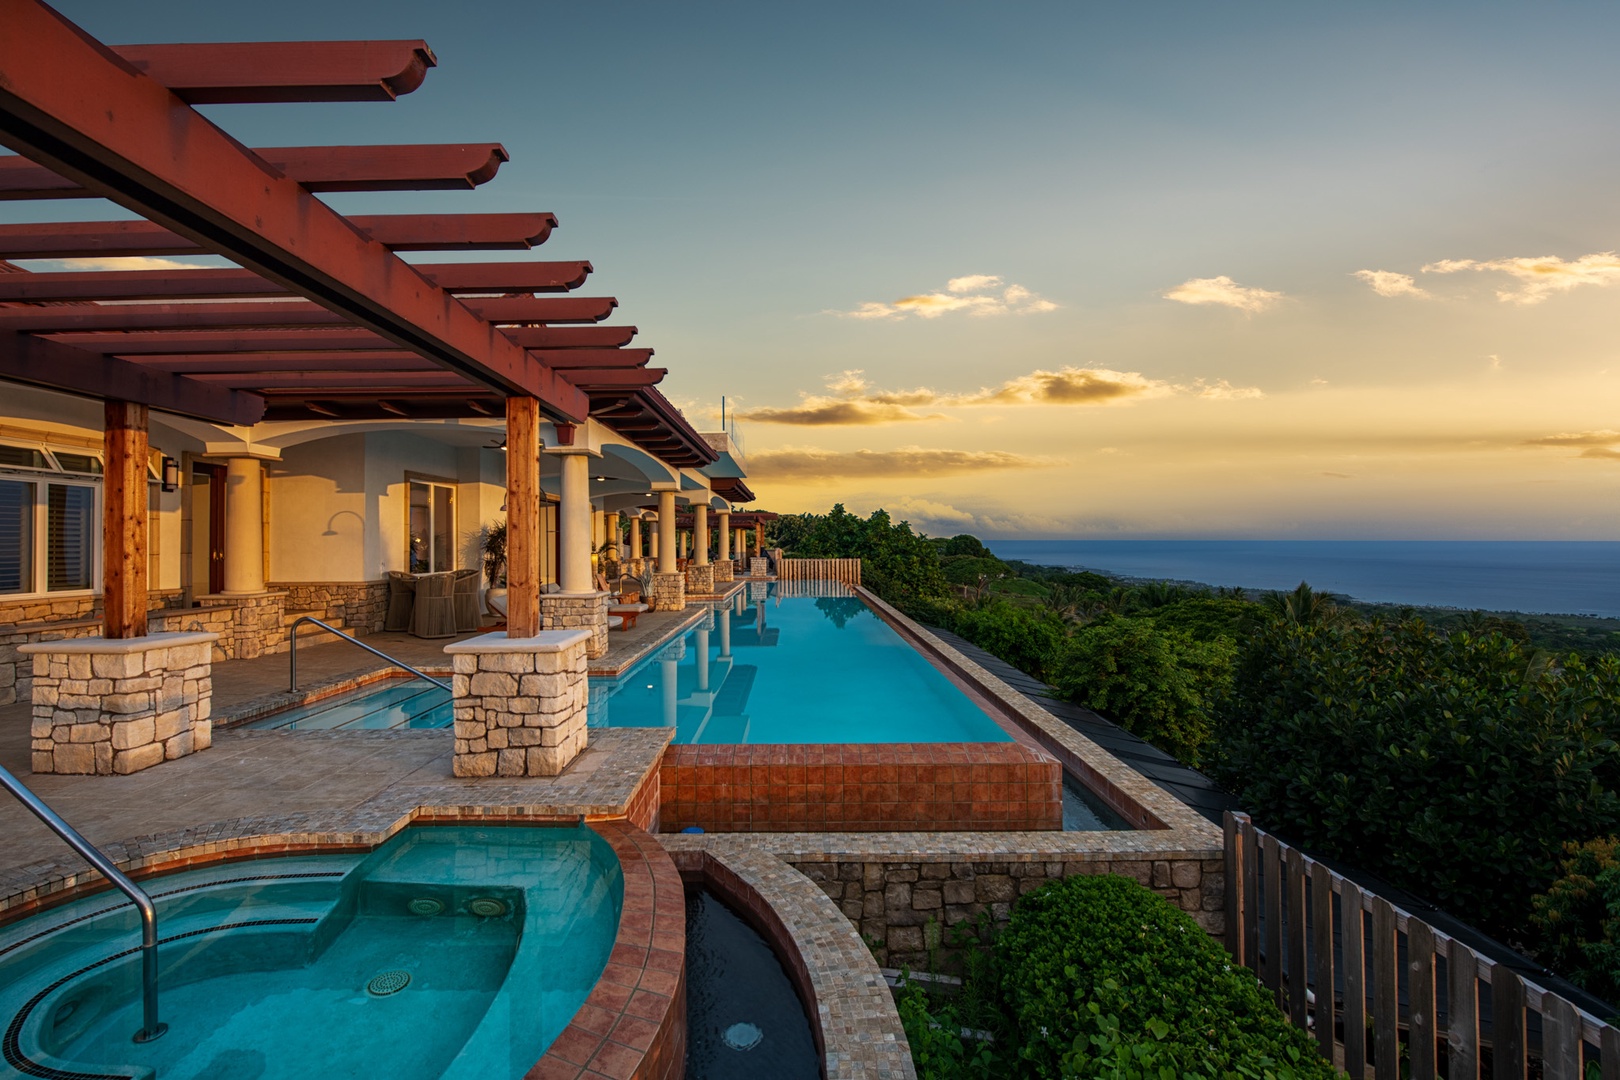 Kailua Kona Vacation Rentals, Kailua Kona Estate** - Endless options to sit back and relax while watching the sunset.